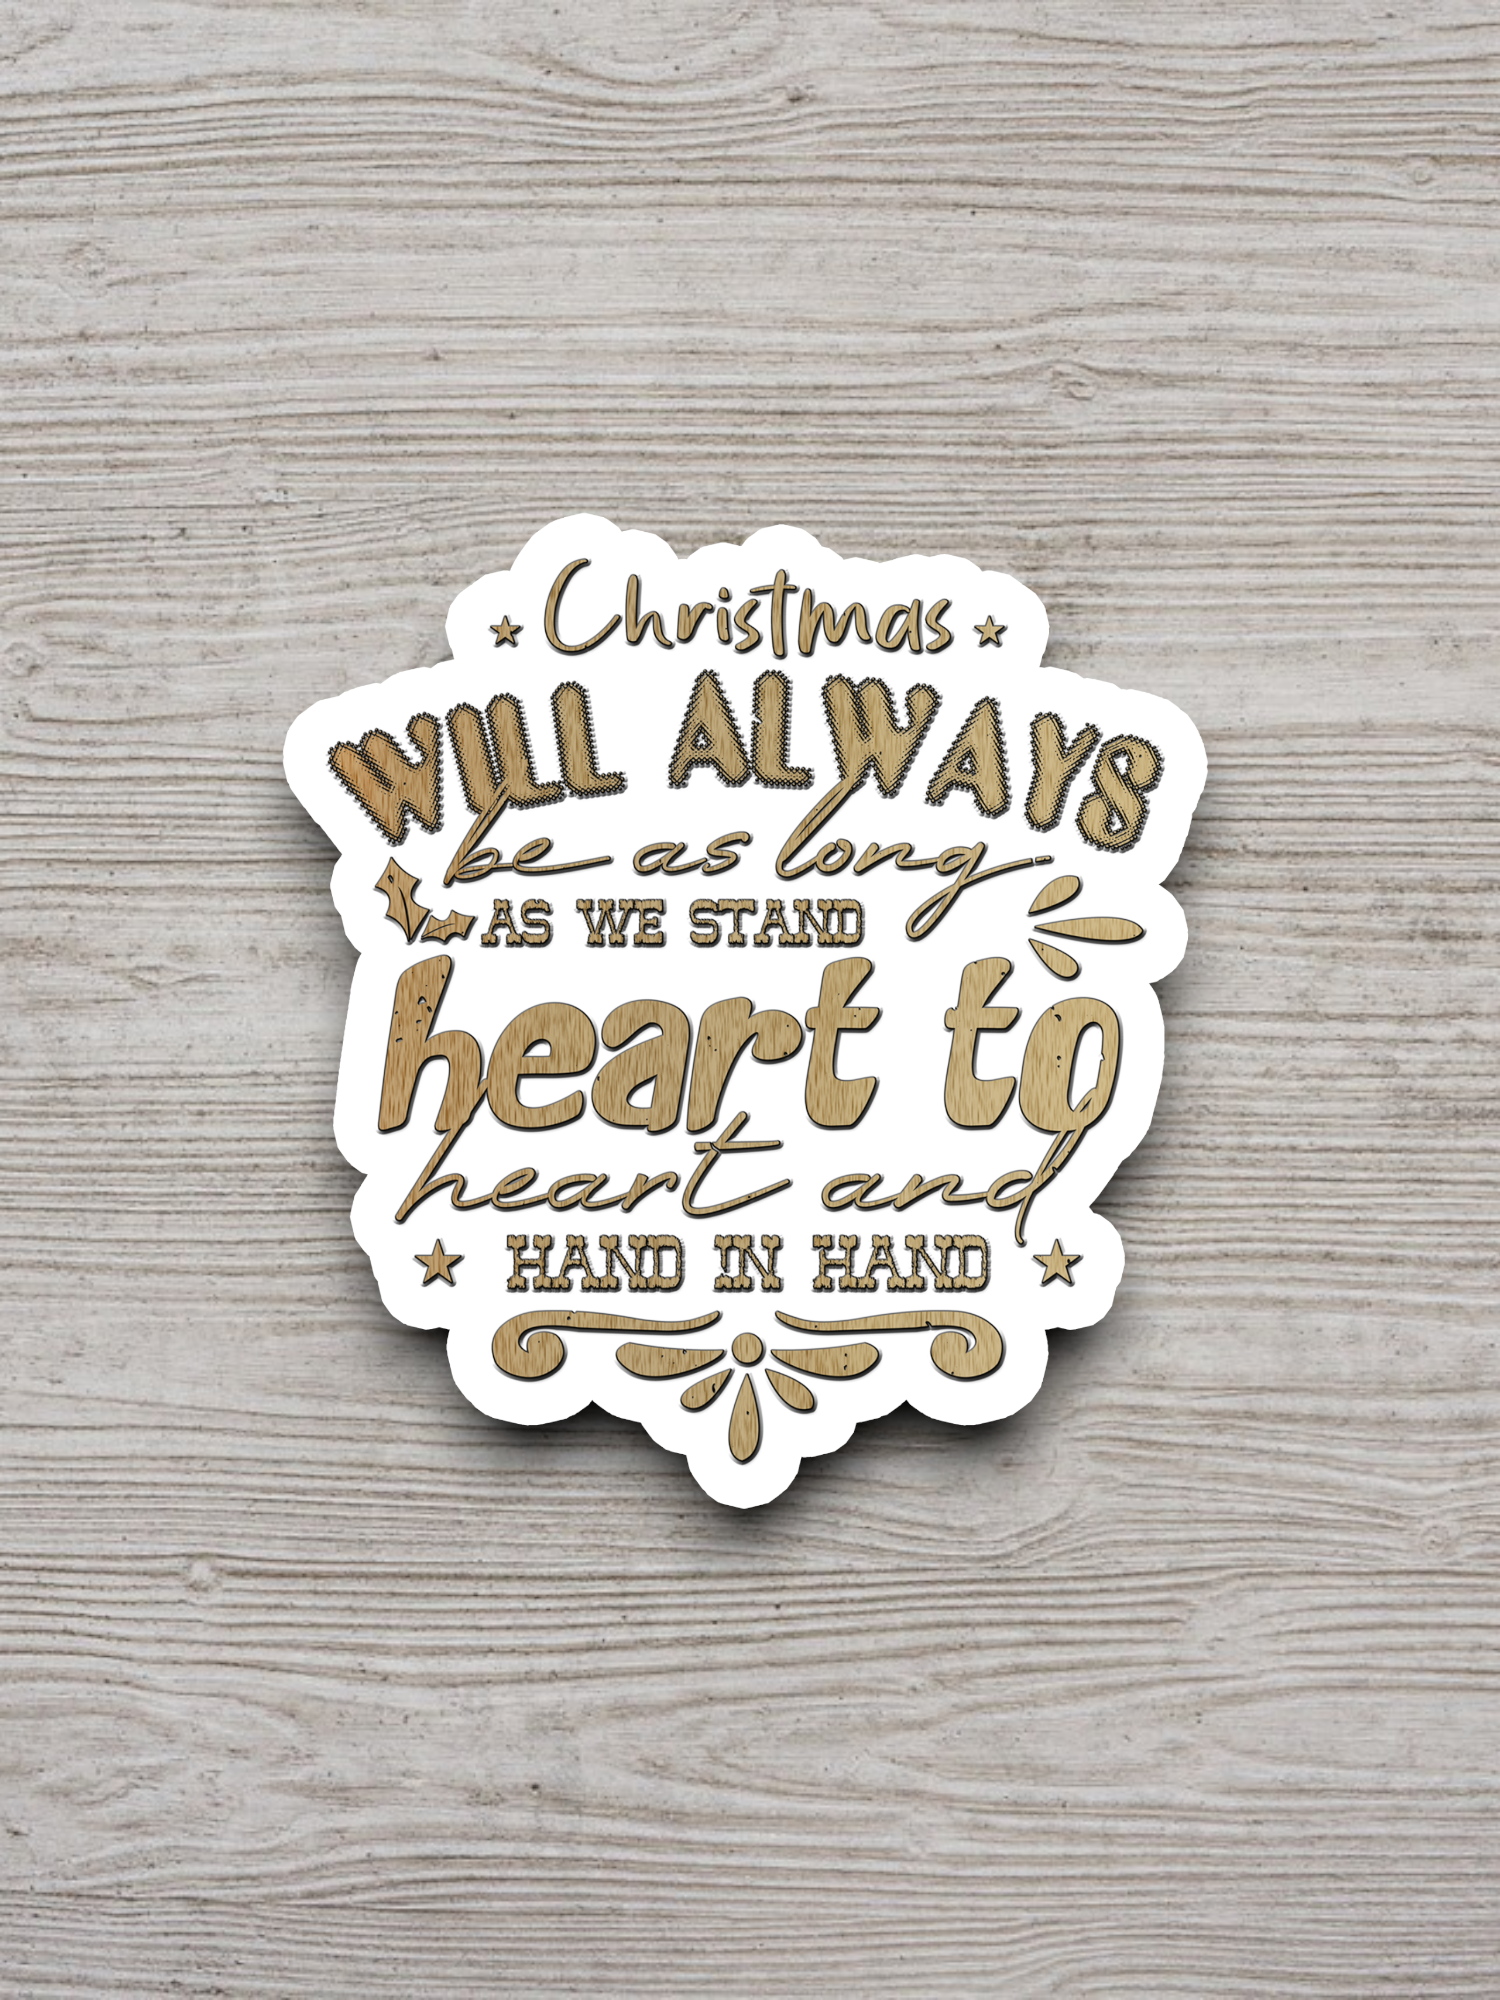 Christmas Will Always Be As Long As We Stand Heart To Heart And Hand In Hand Sticker